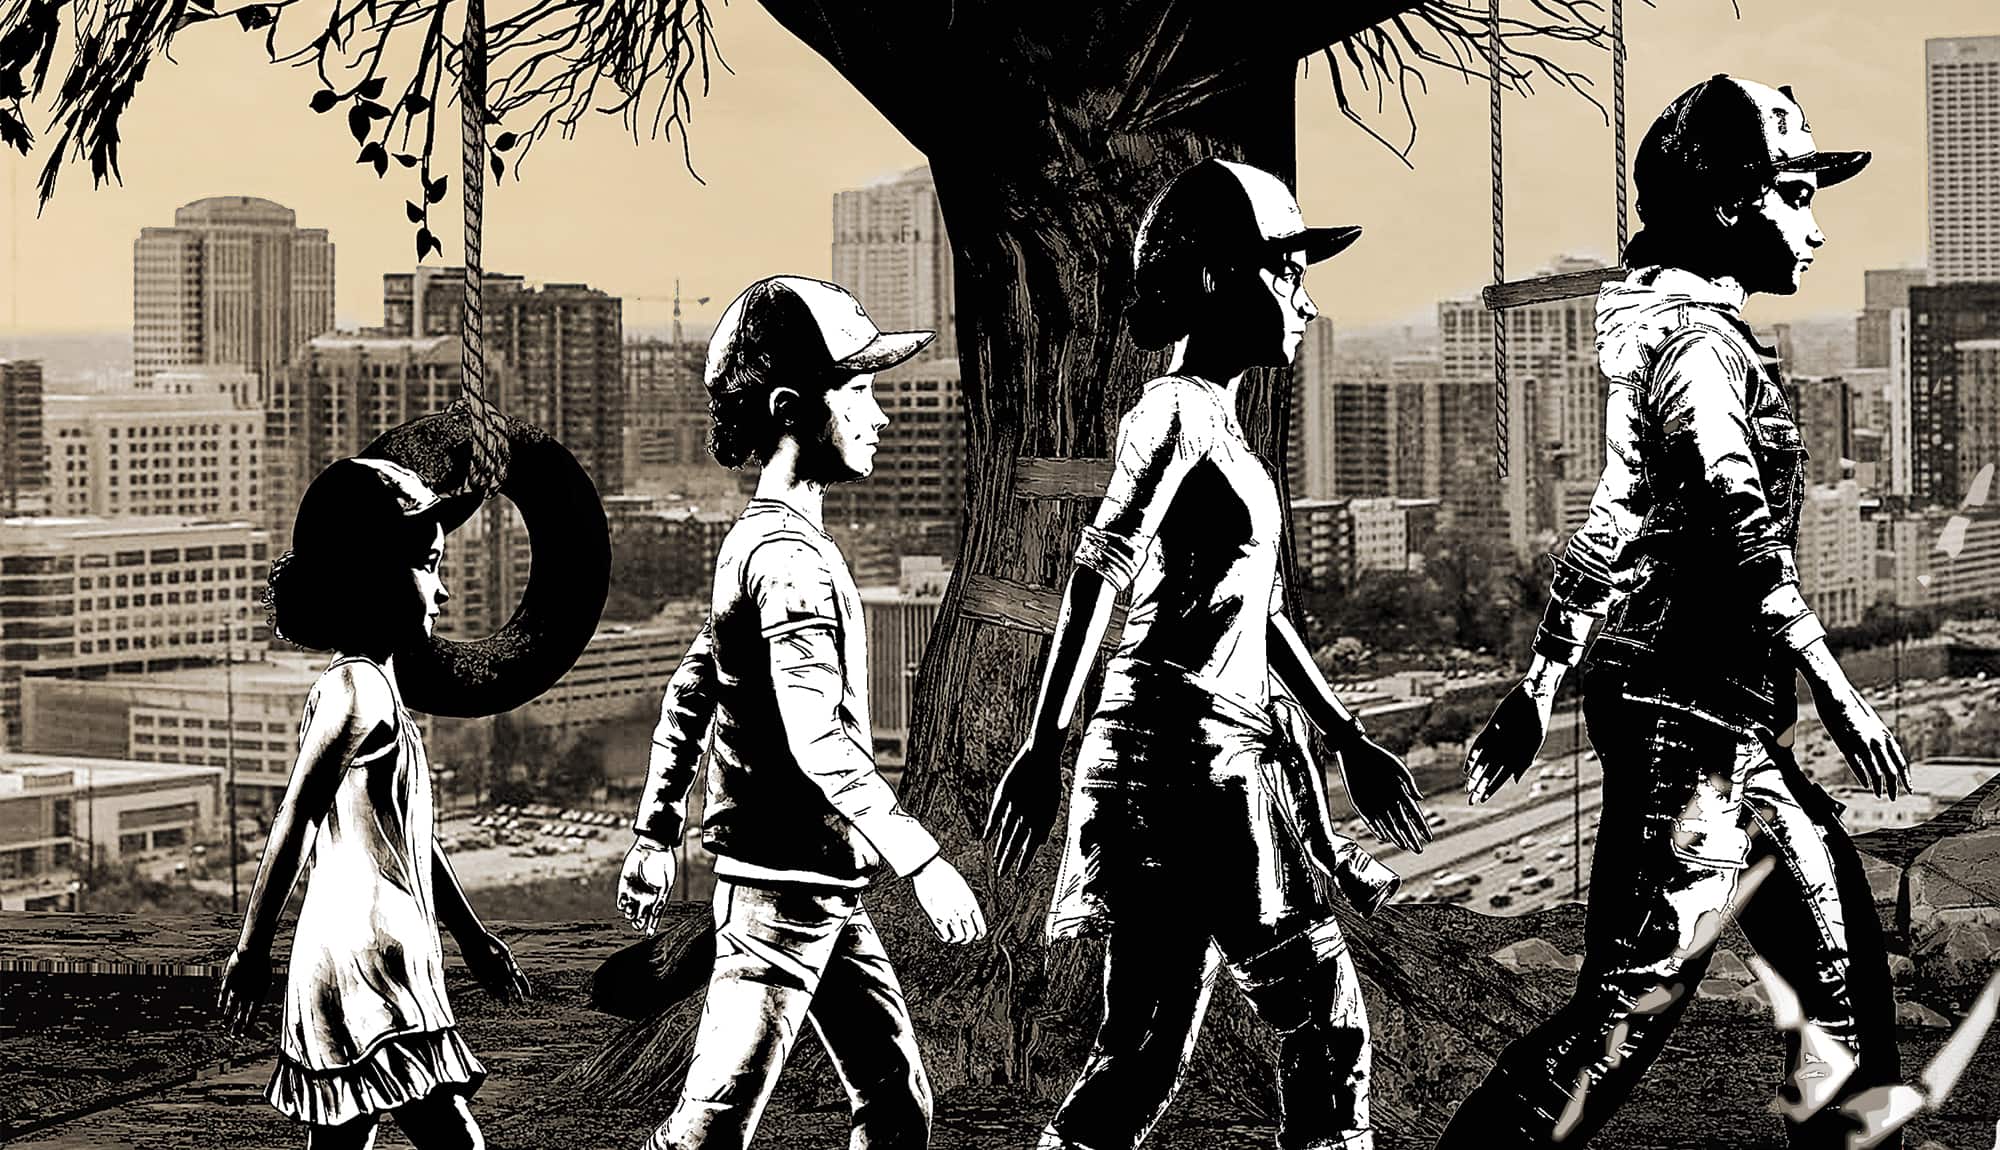 Introducing Telltale’s The Walking Dead – The Definitive Edition!